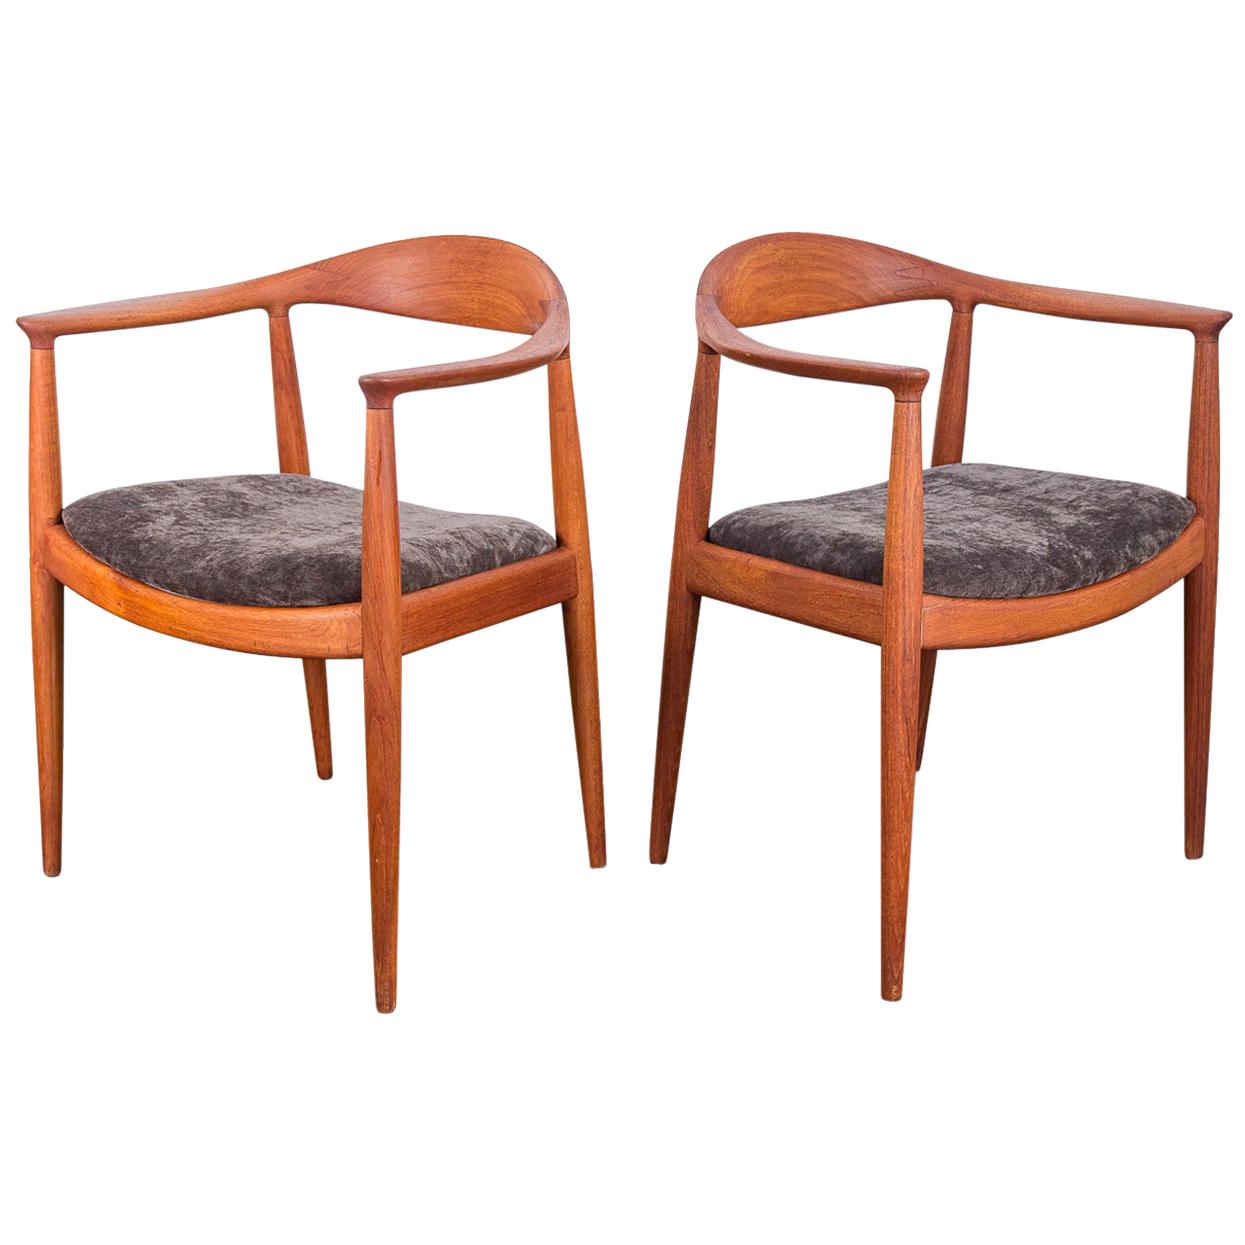 Pair of Hans Wegner Round Chairs For Sale